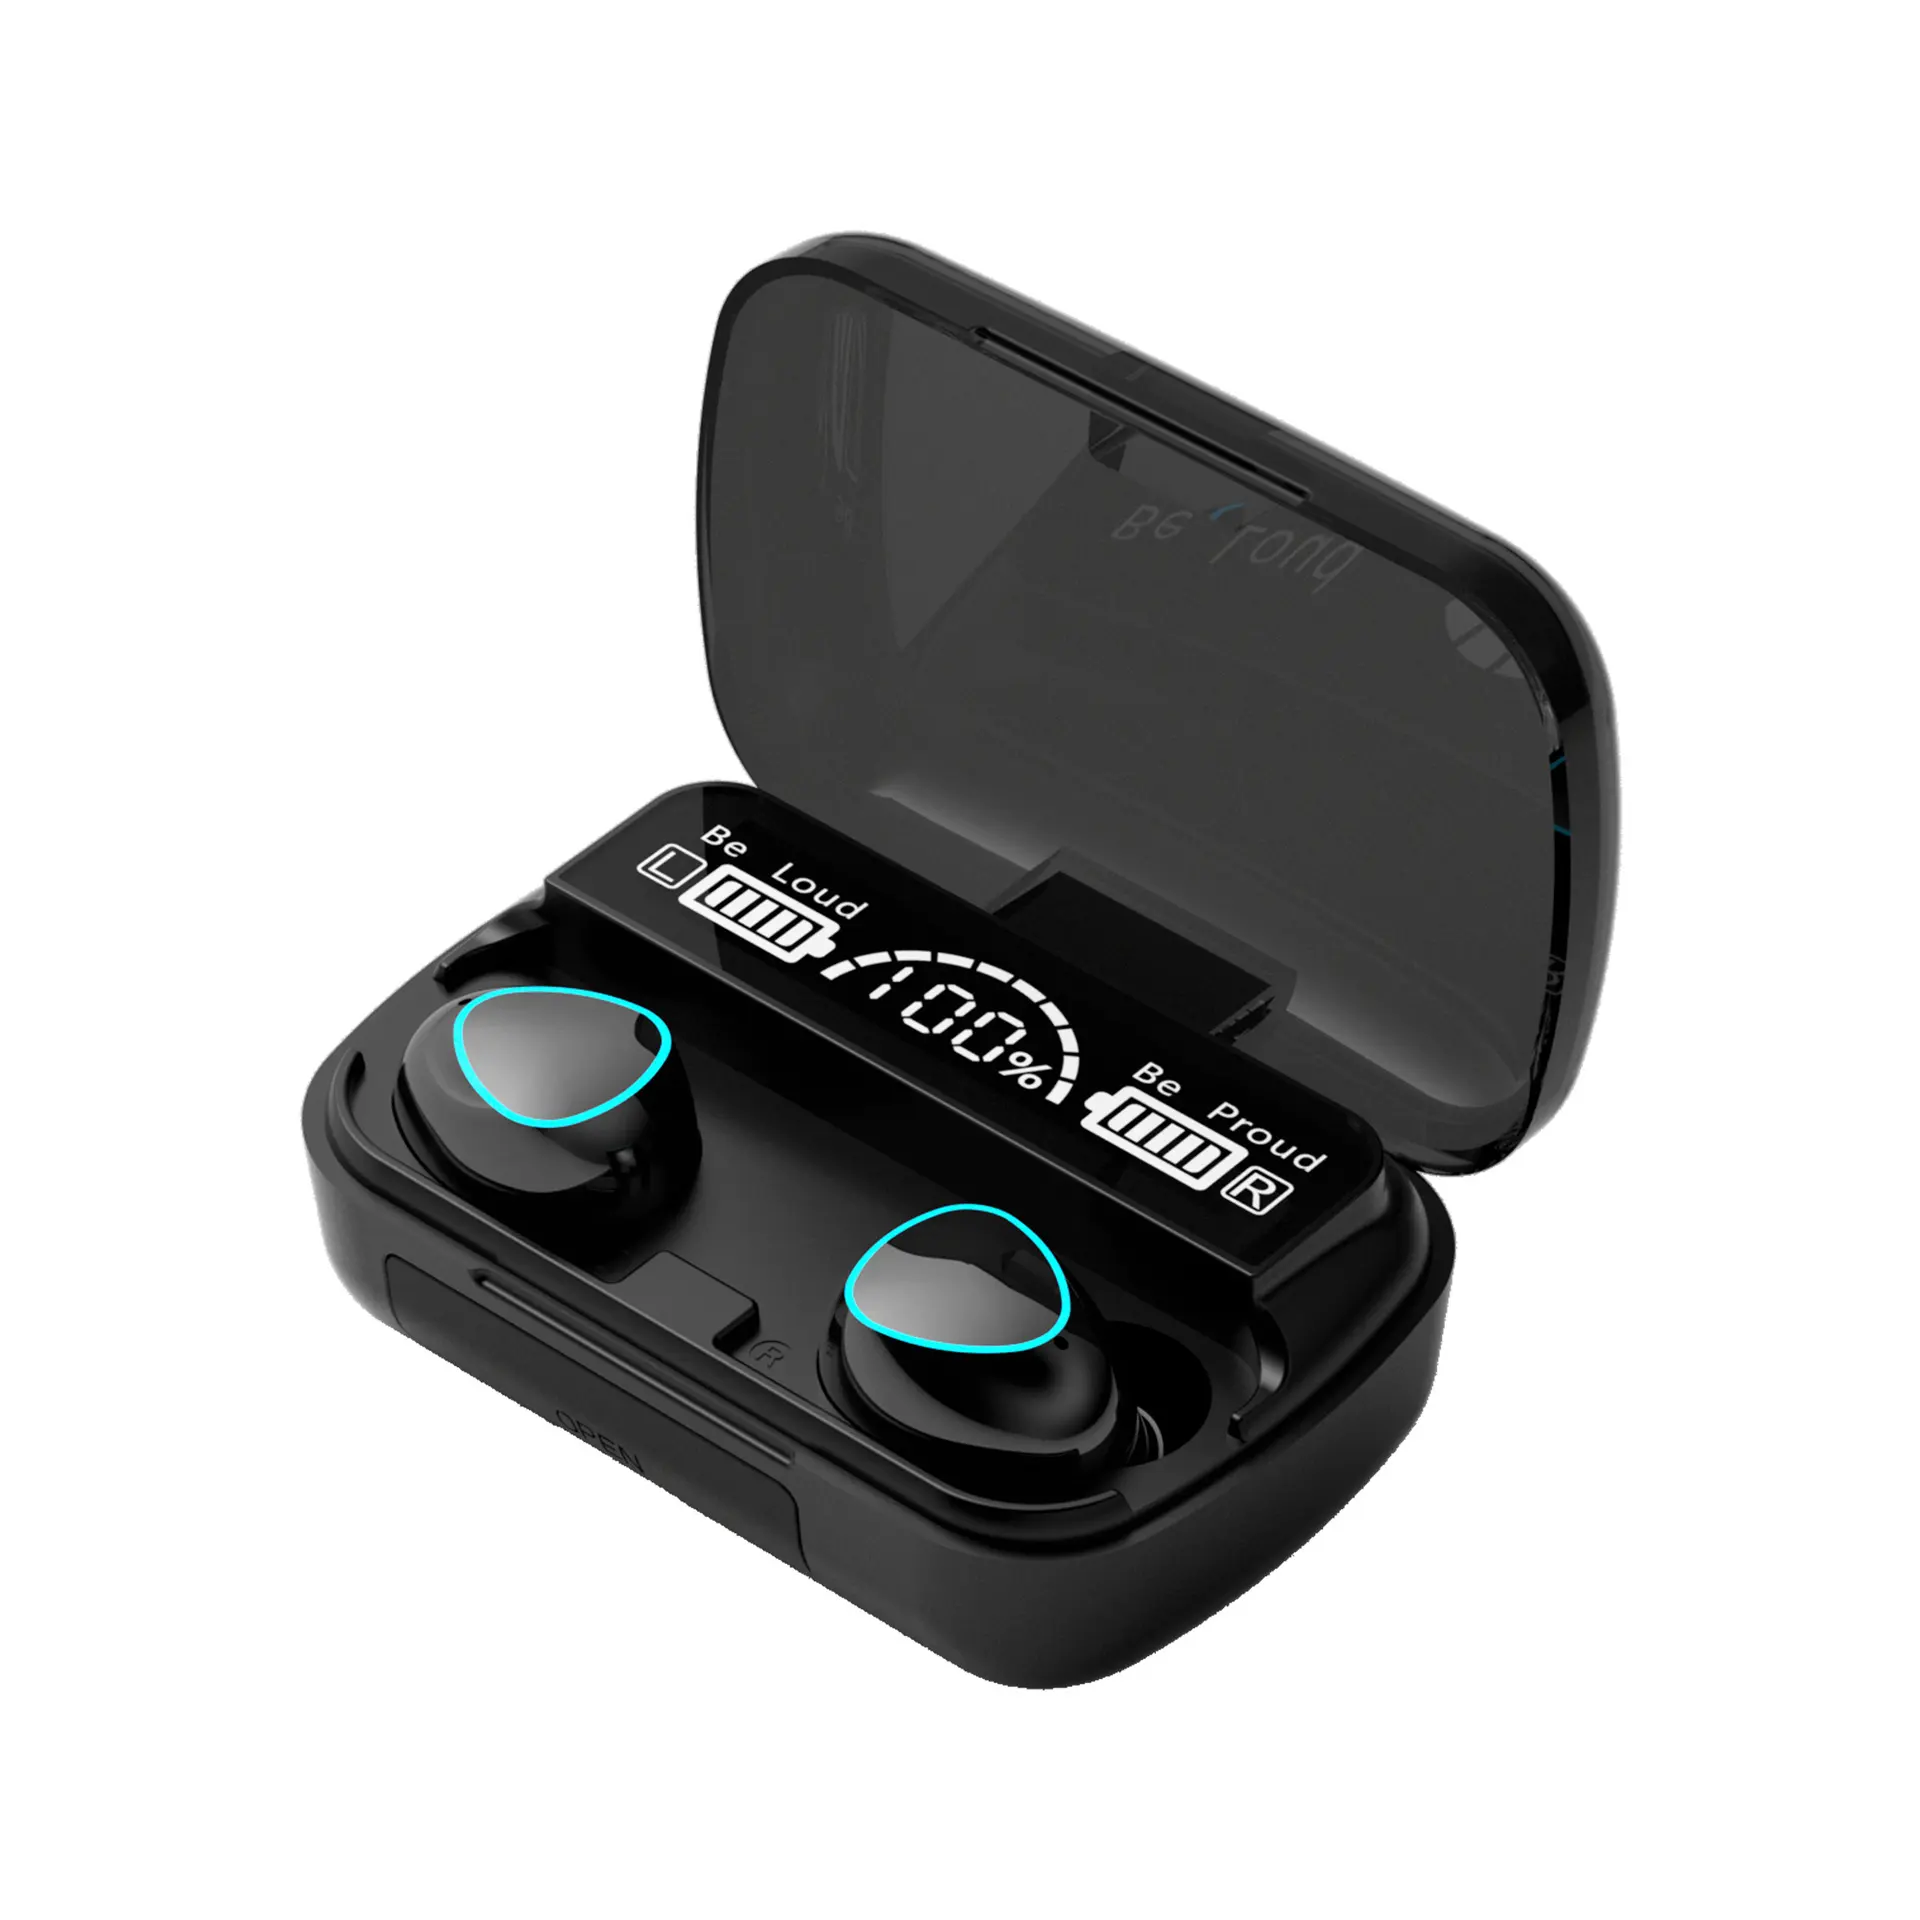 Upgraded touch version TWS 5.1 wireless headphone charging box 9D stereo true noise reduction sports waterproof earbuds